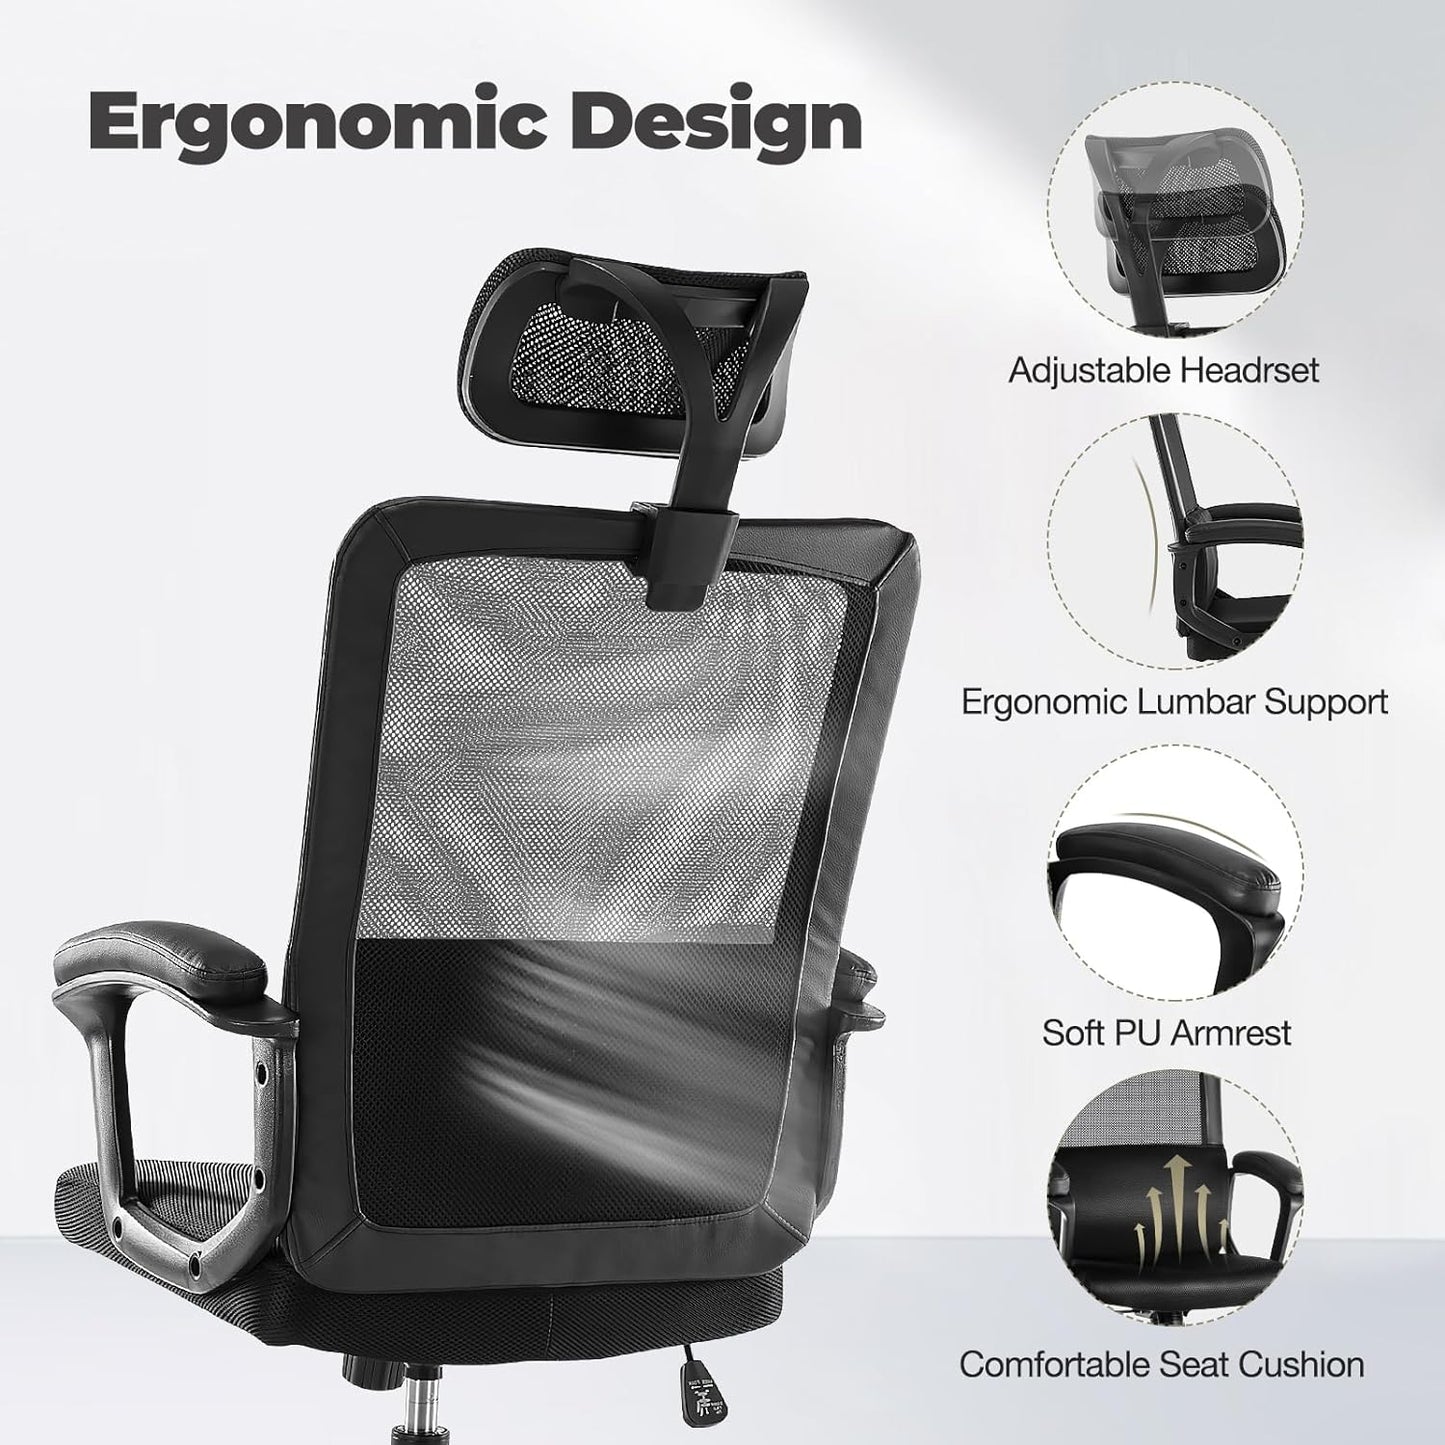 Ergonomic Home Mesh Swivel Rolling Office Desk Computer Chair with Adjustable Headrest, Soft PU Armrest, Lumbar Support and Rocking Function, 18.11" D x 19.49" W x 43.5" H, Black